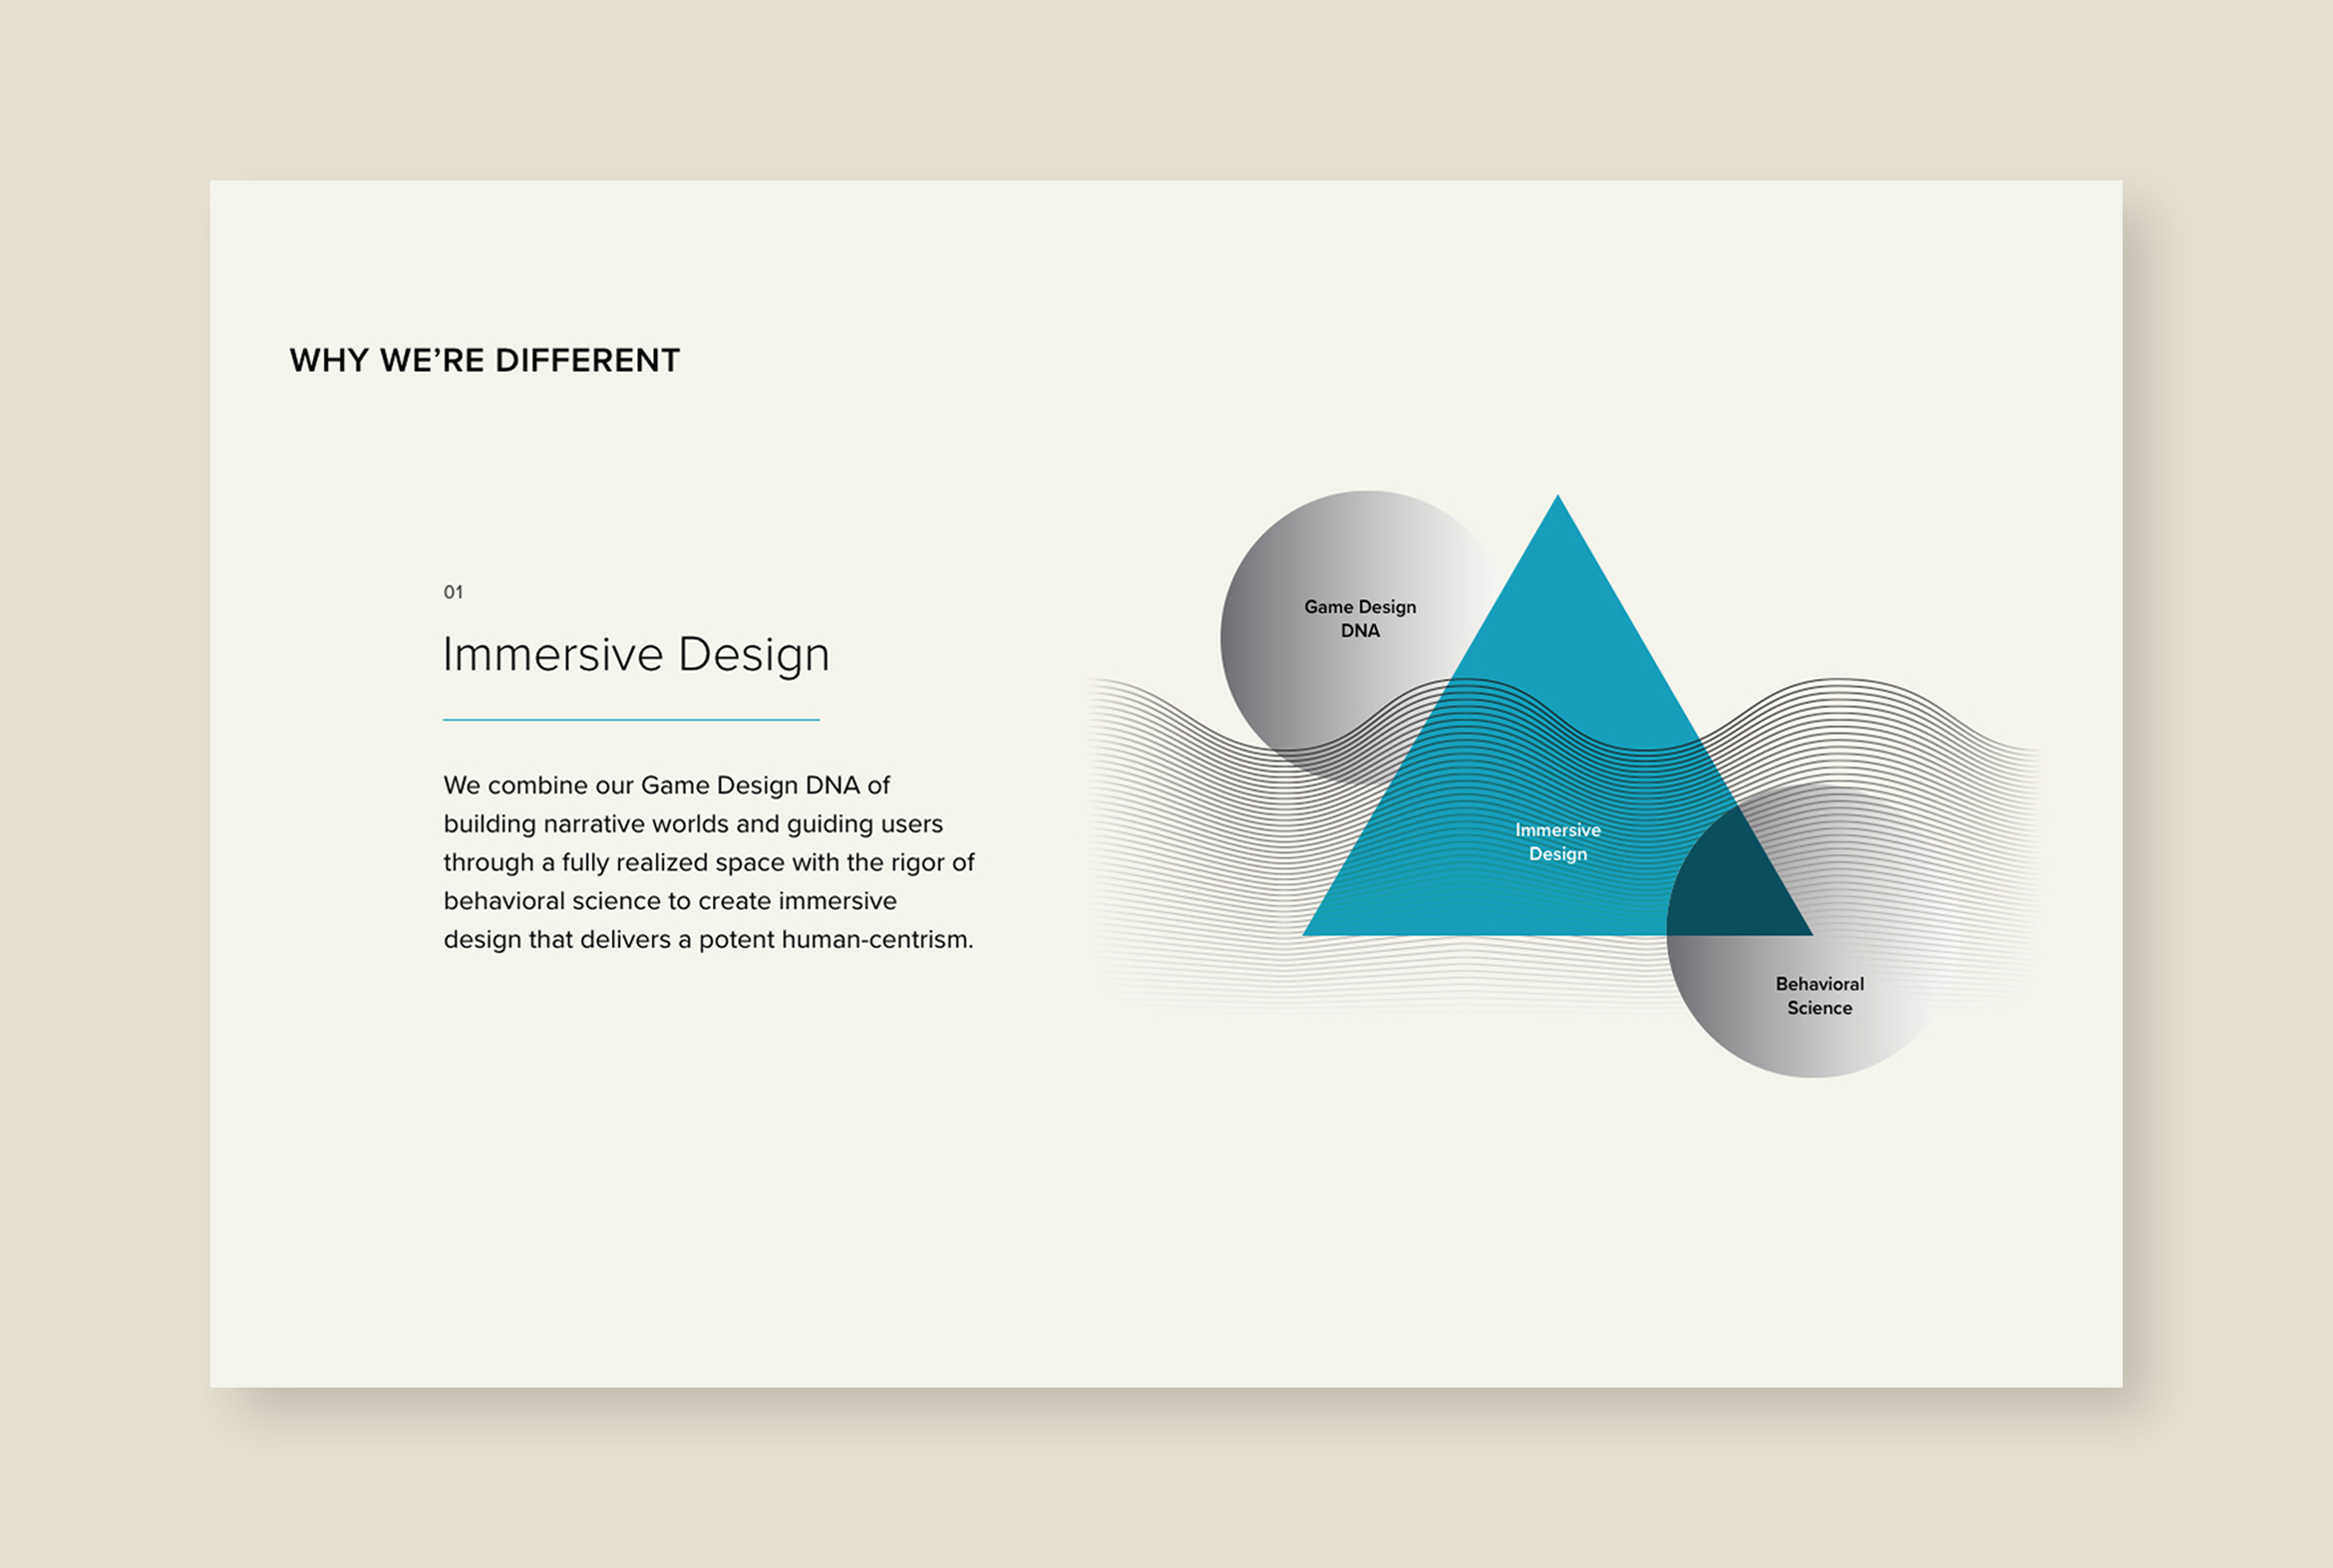 bldg25 website infographic of why we're different about immersive design